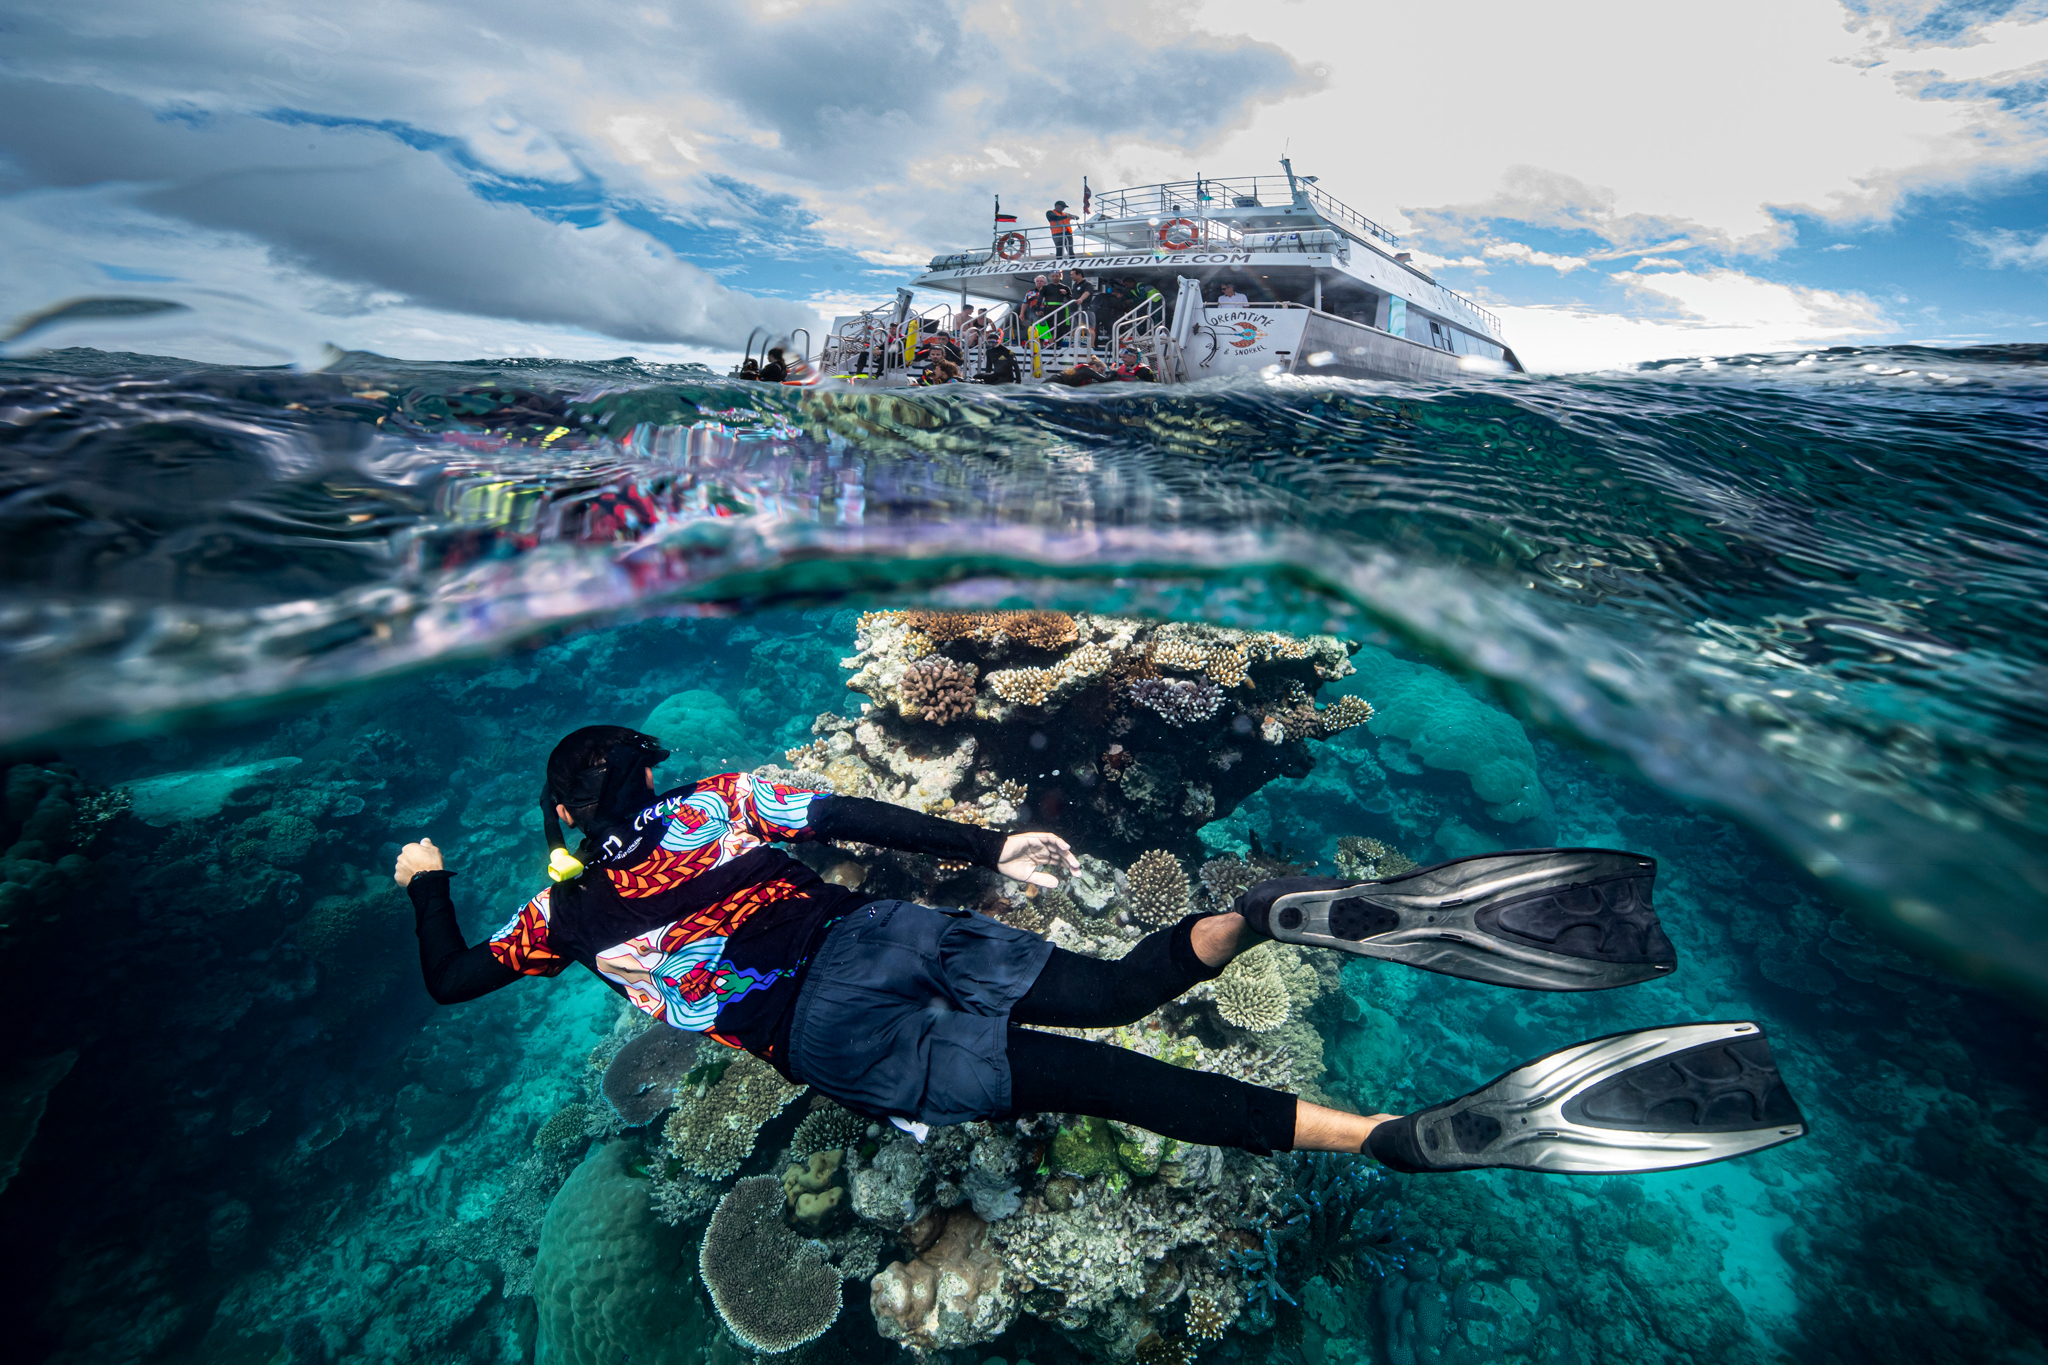 A Dreamtime Dive & Snorkel guide in the Great Barrier Reef, QLD © Tourism Australia